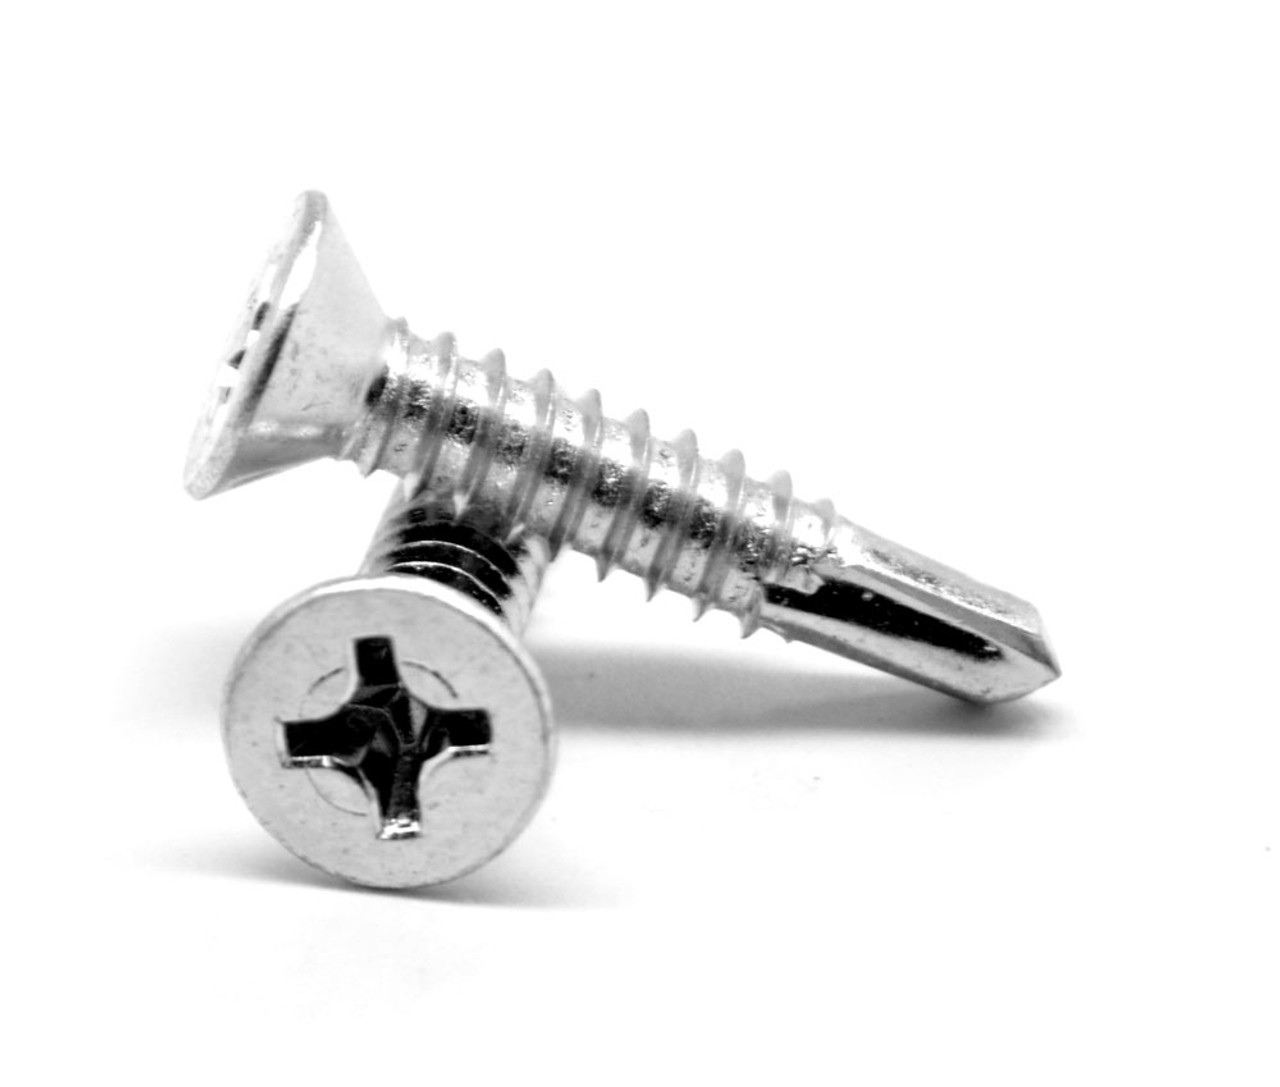 #6-20 x 7/8" (FT) Self Drilling Screws Phillips Flat Head #2 Point Stainless Steel 410